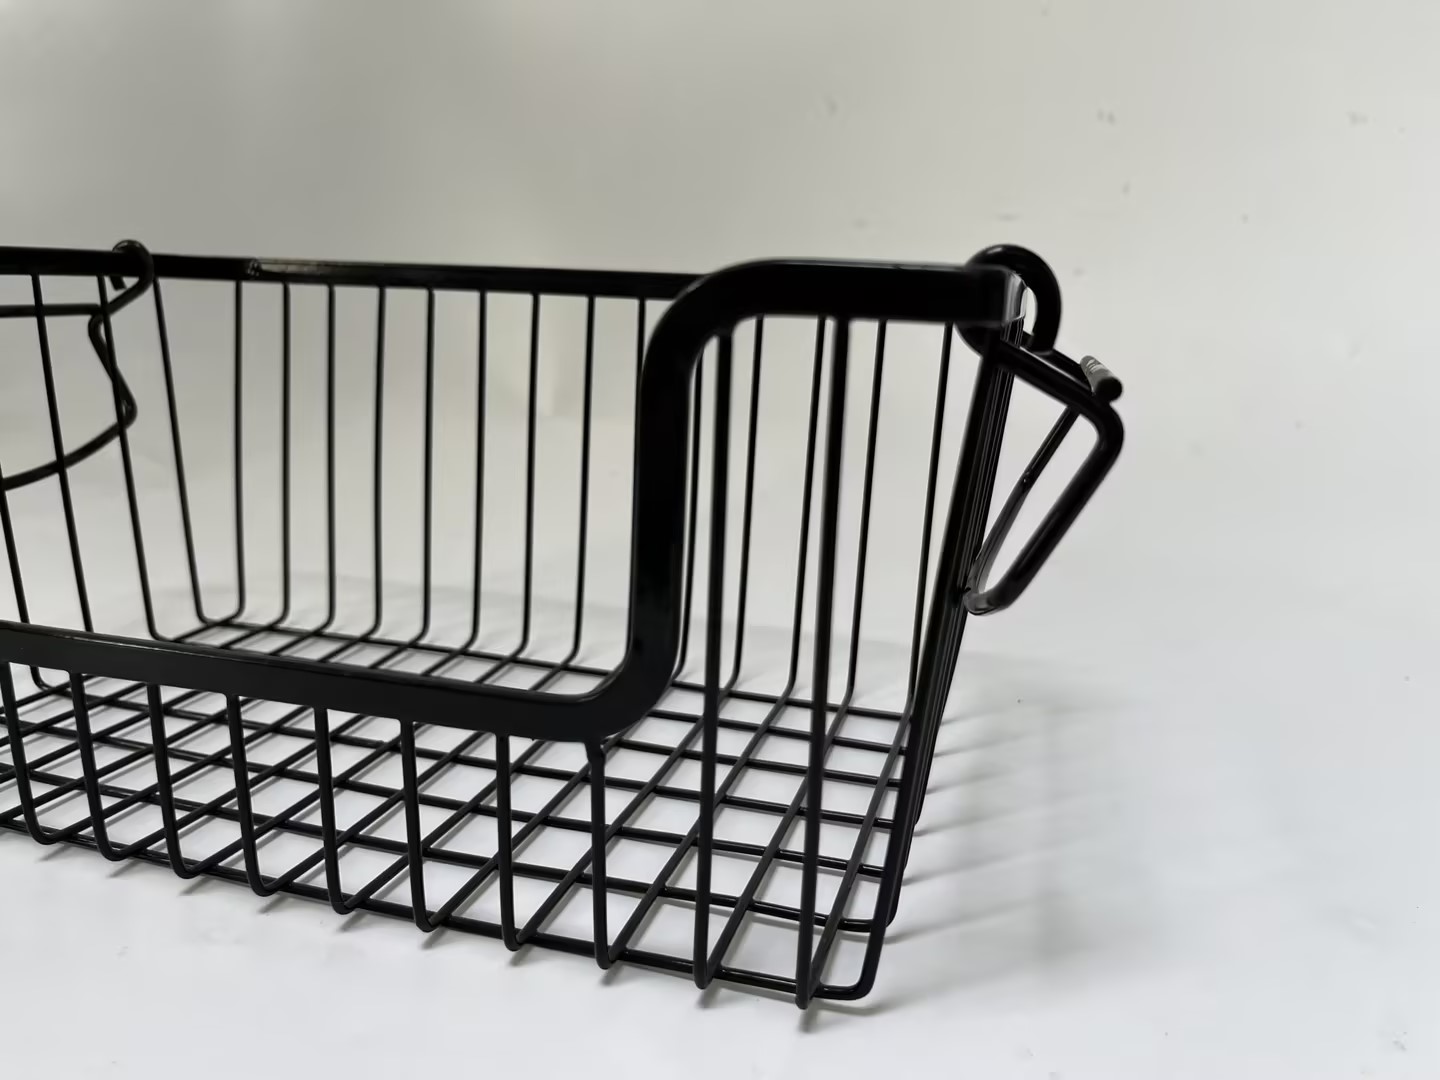 Topsome Baskets for Household Purposes Wire Baskets for Organizing Household Pantry Baskets 2 Pack Metal Baskets for Pantry Storage Wire Storage Baskets Black Metal Storage Bins